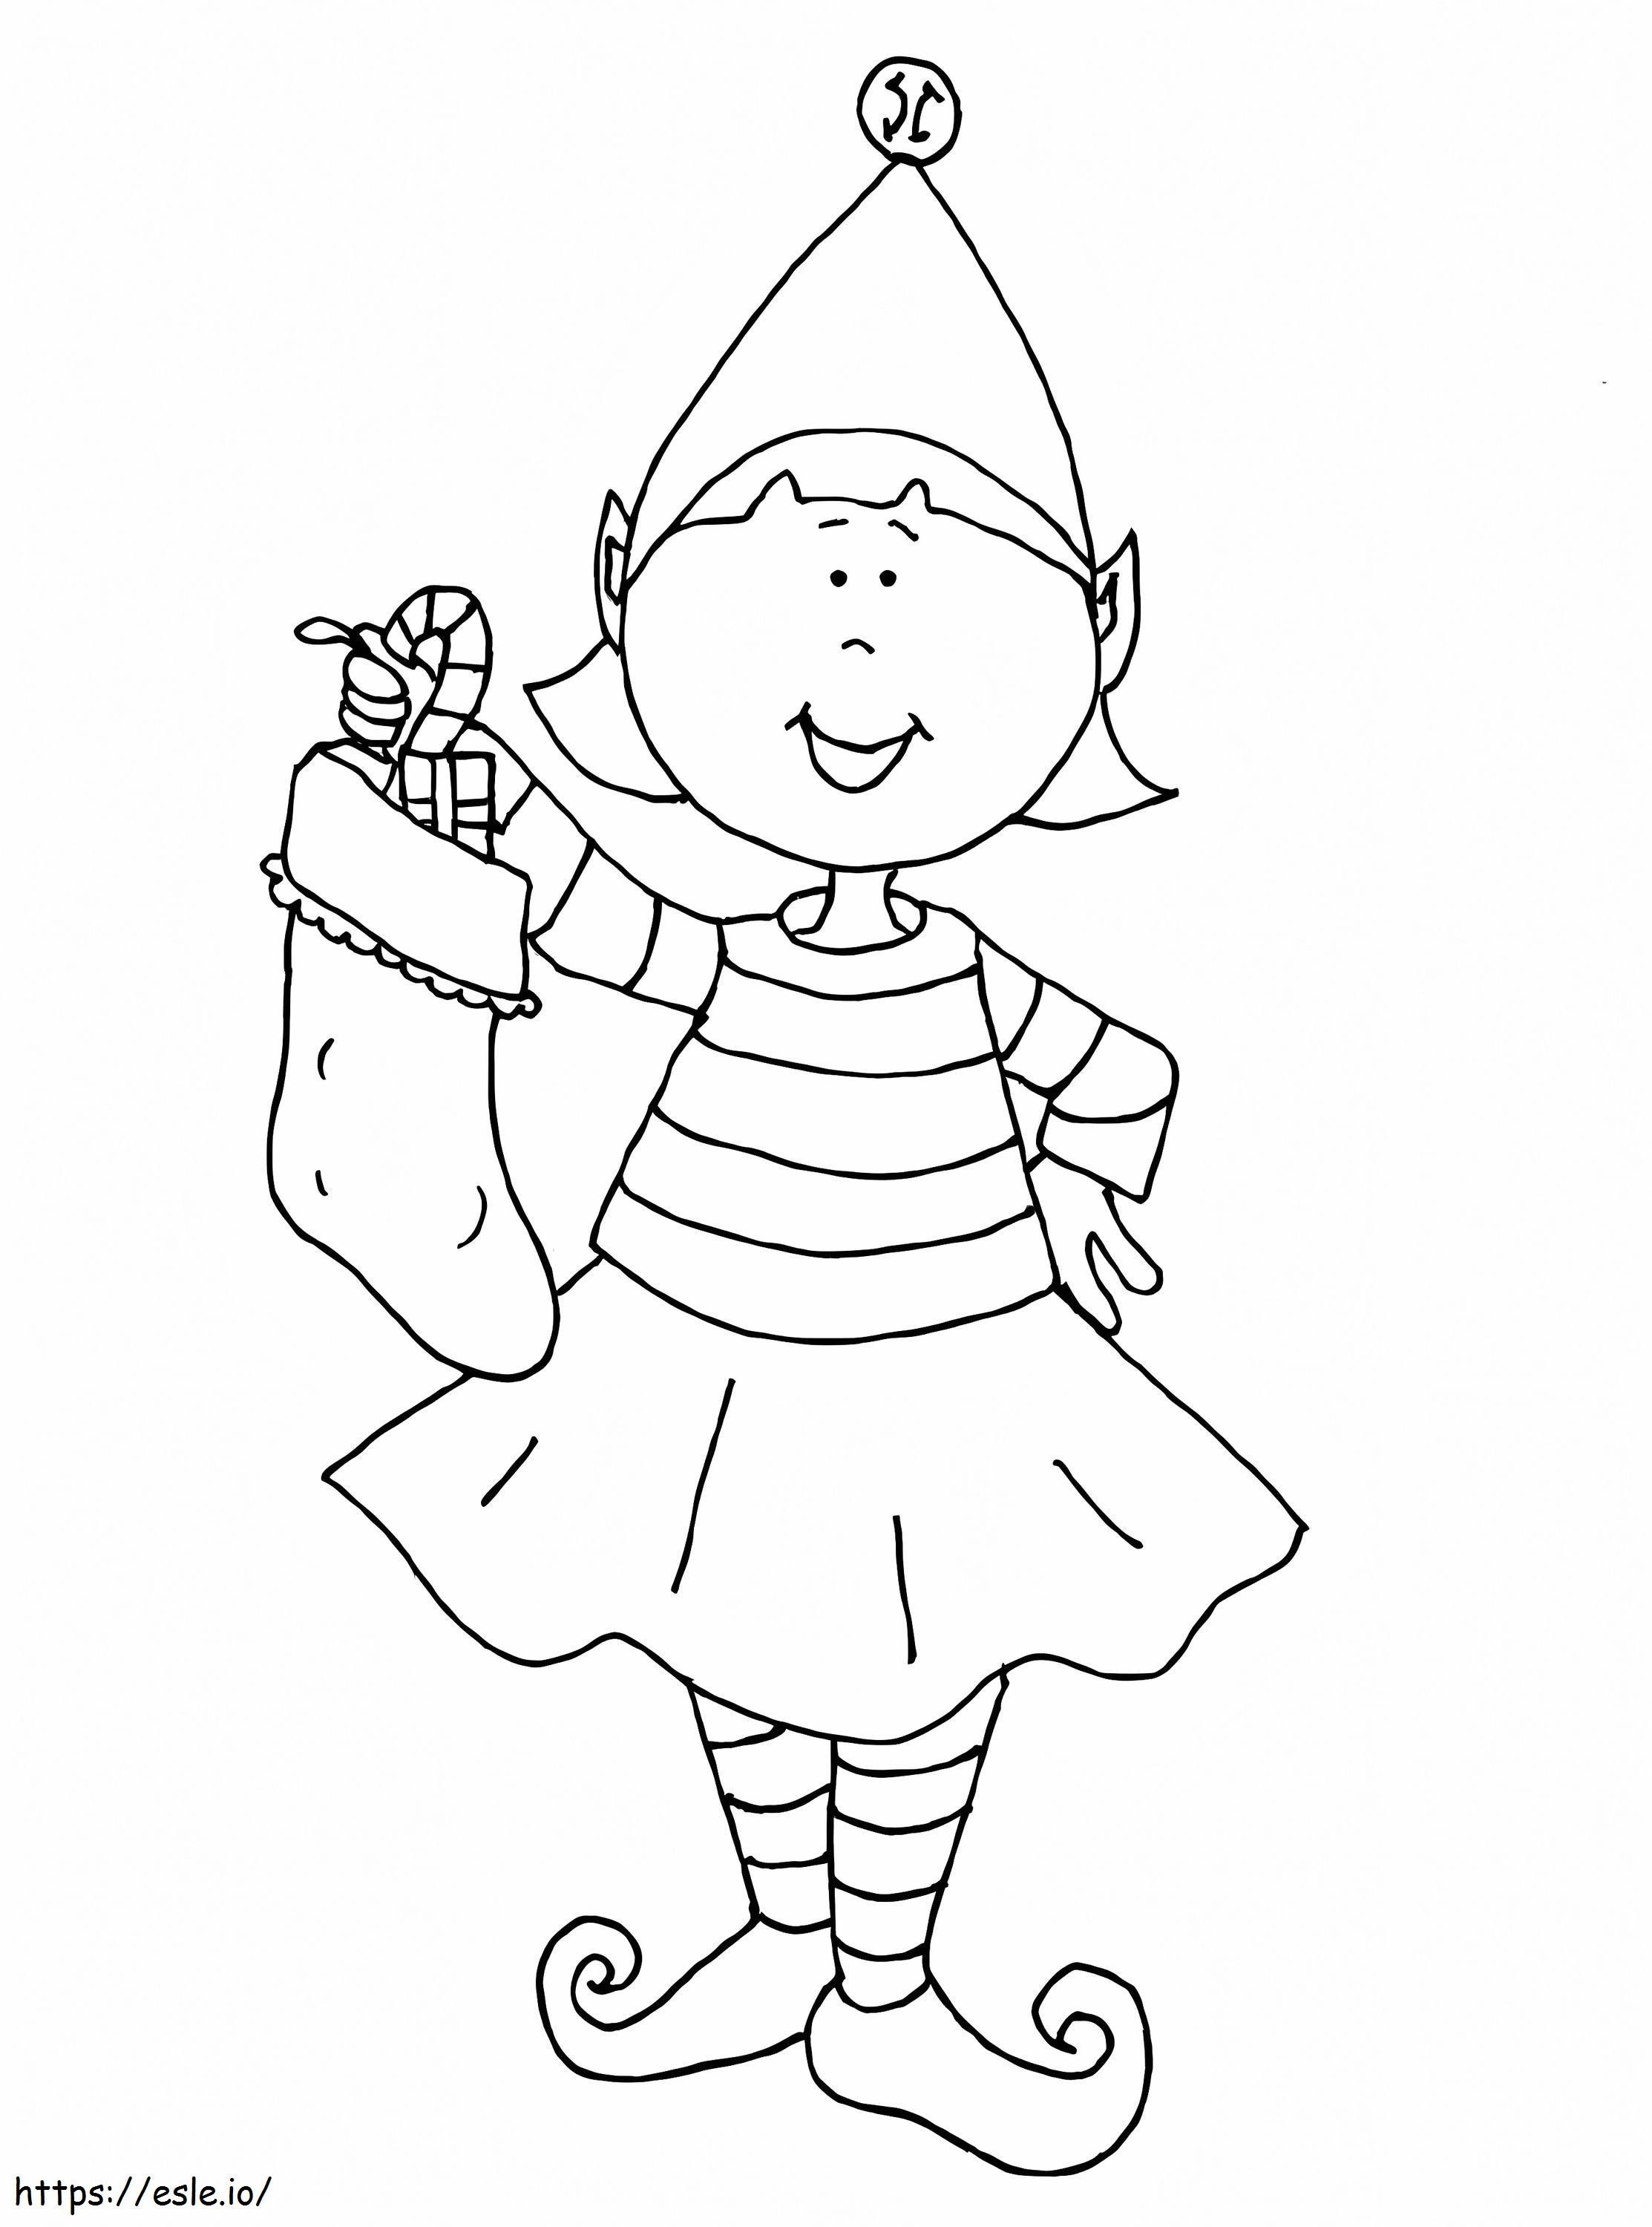 Elf On The Shelf 3 coloring page